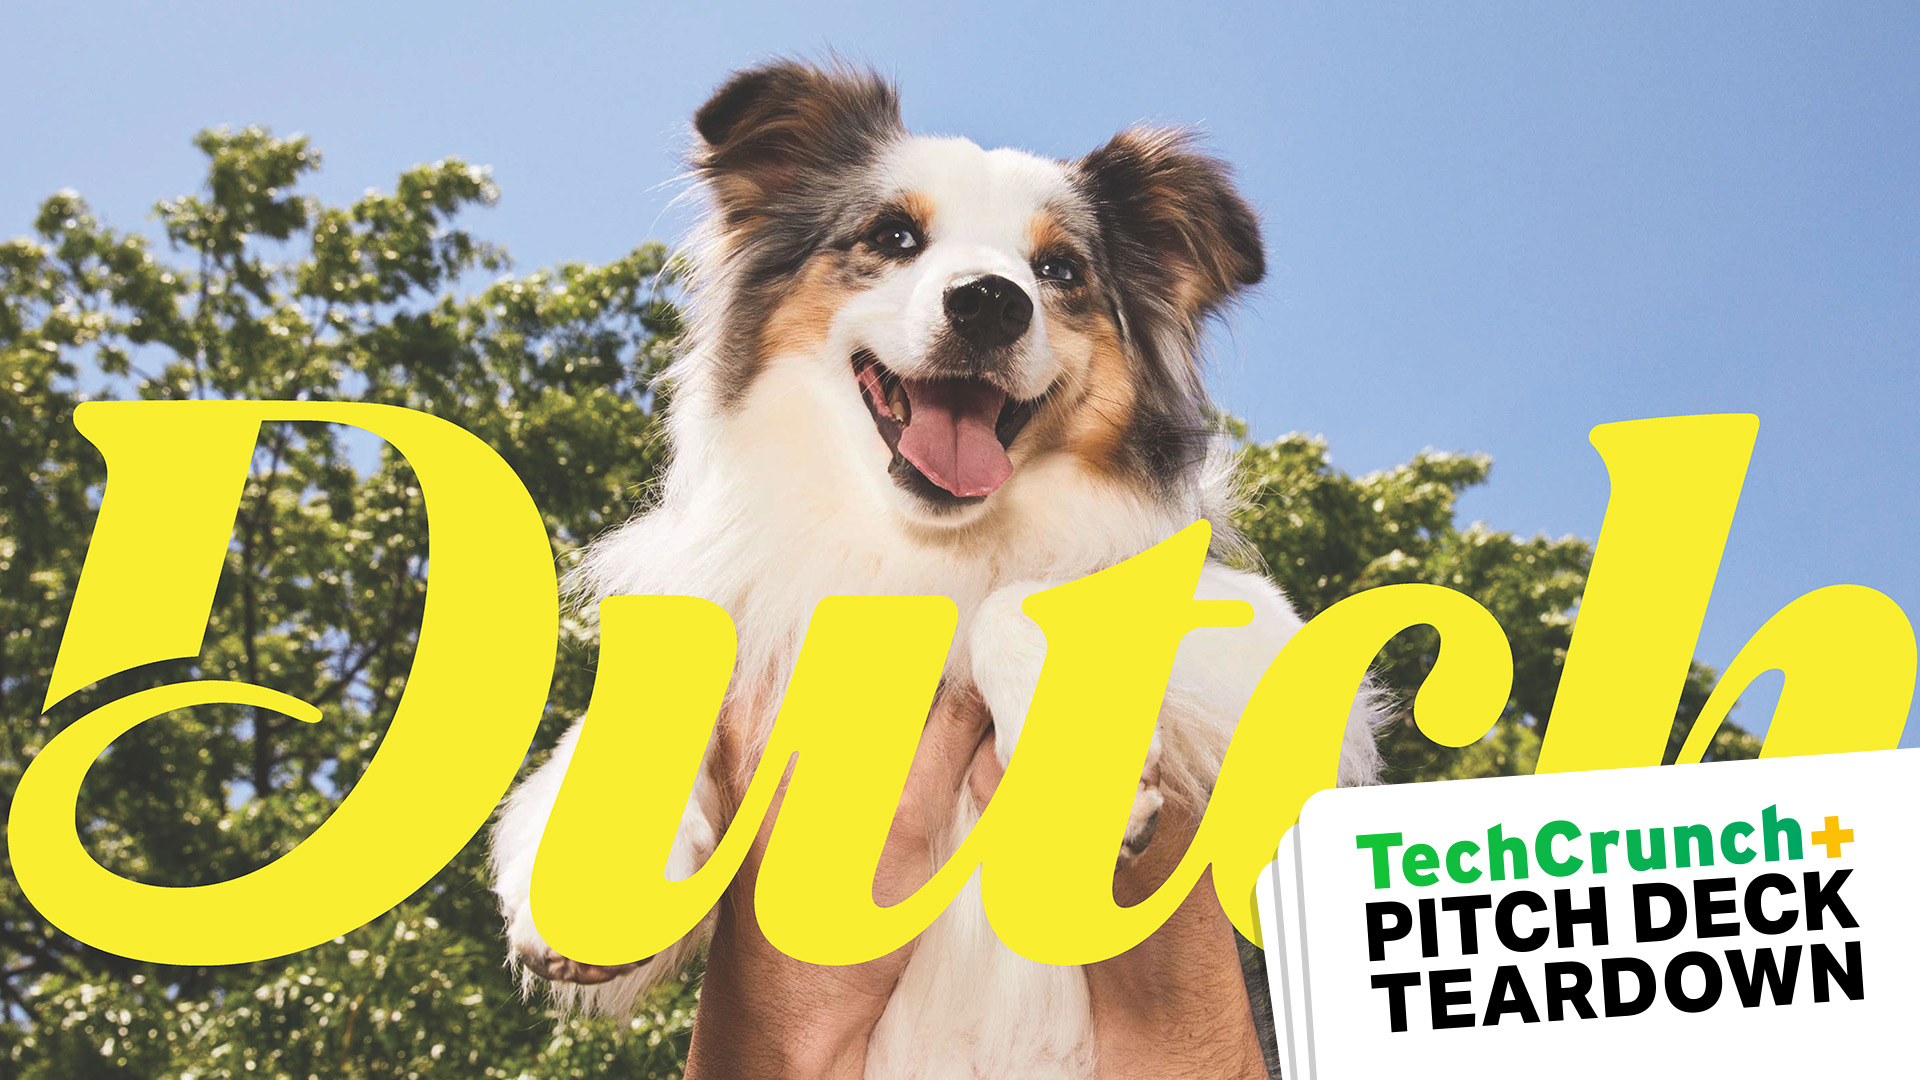 Pitch deck cover slide with a cute dog, the word DUTCH, and Website Maker News Pitch Deck Teardown overlaid